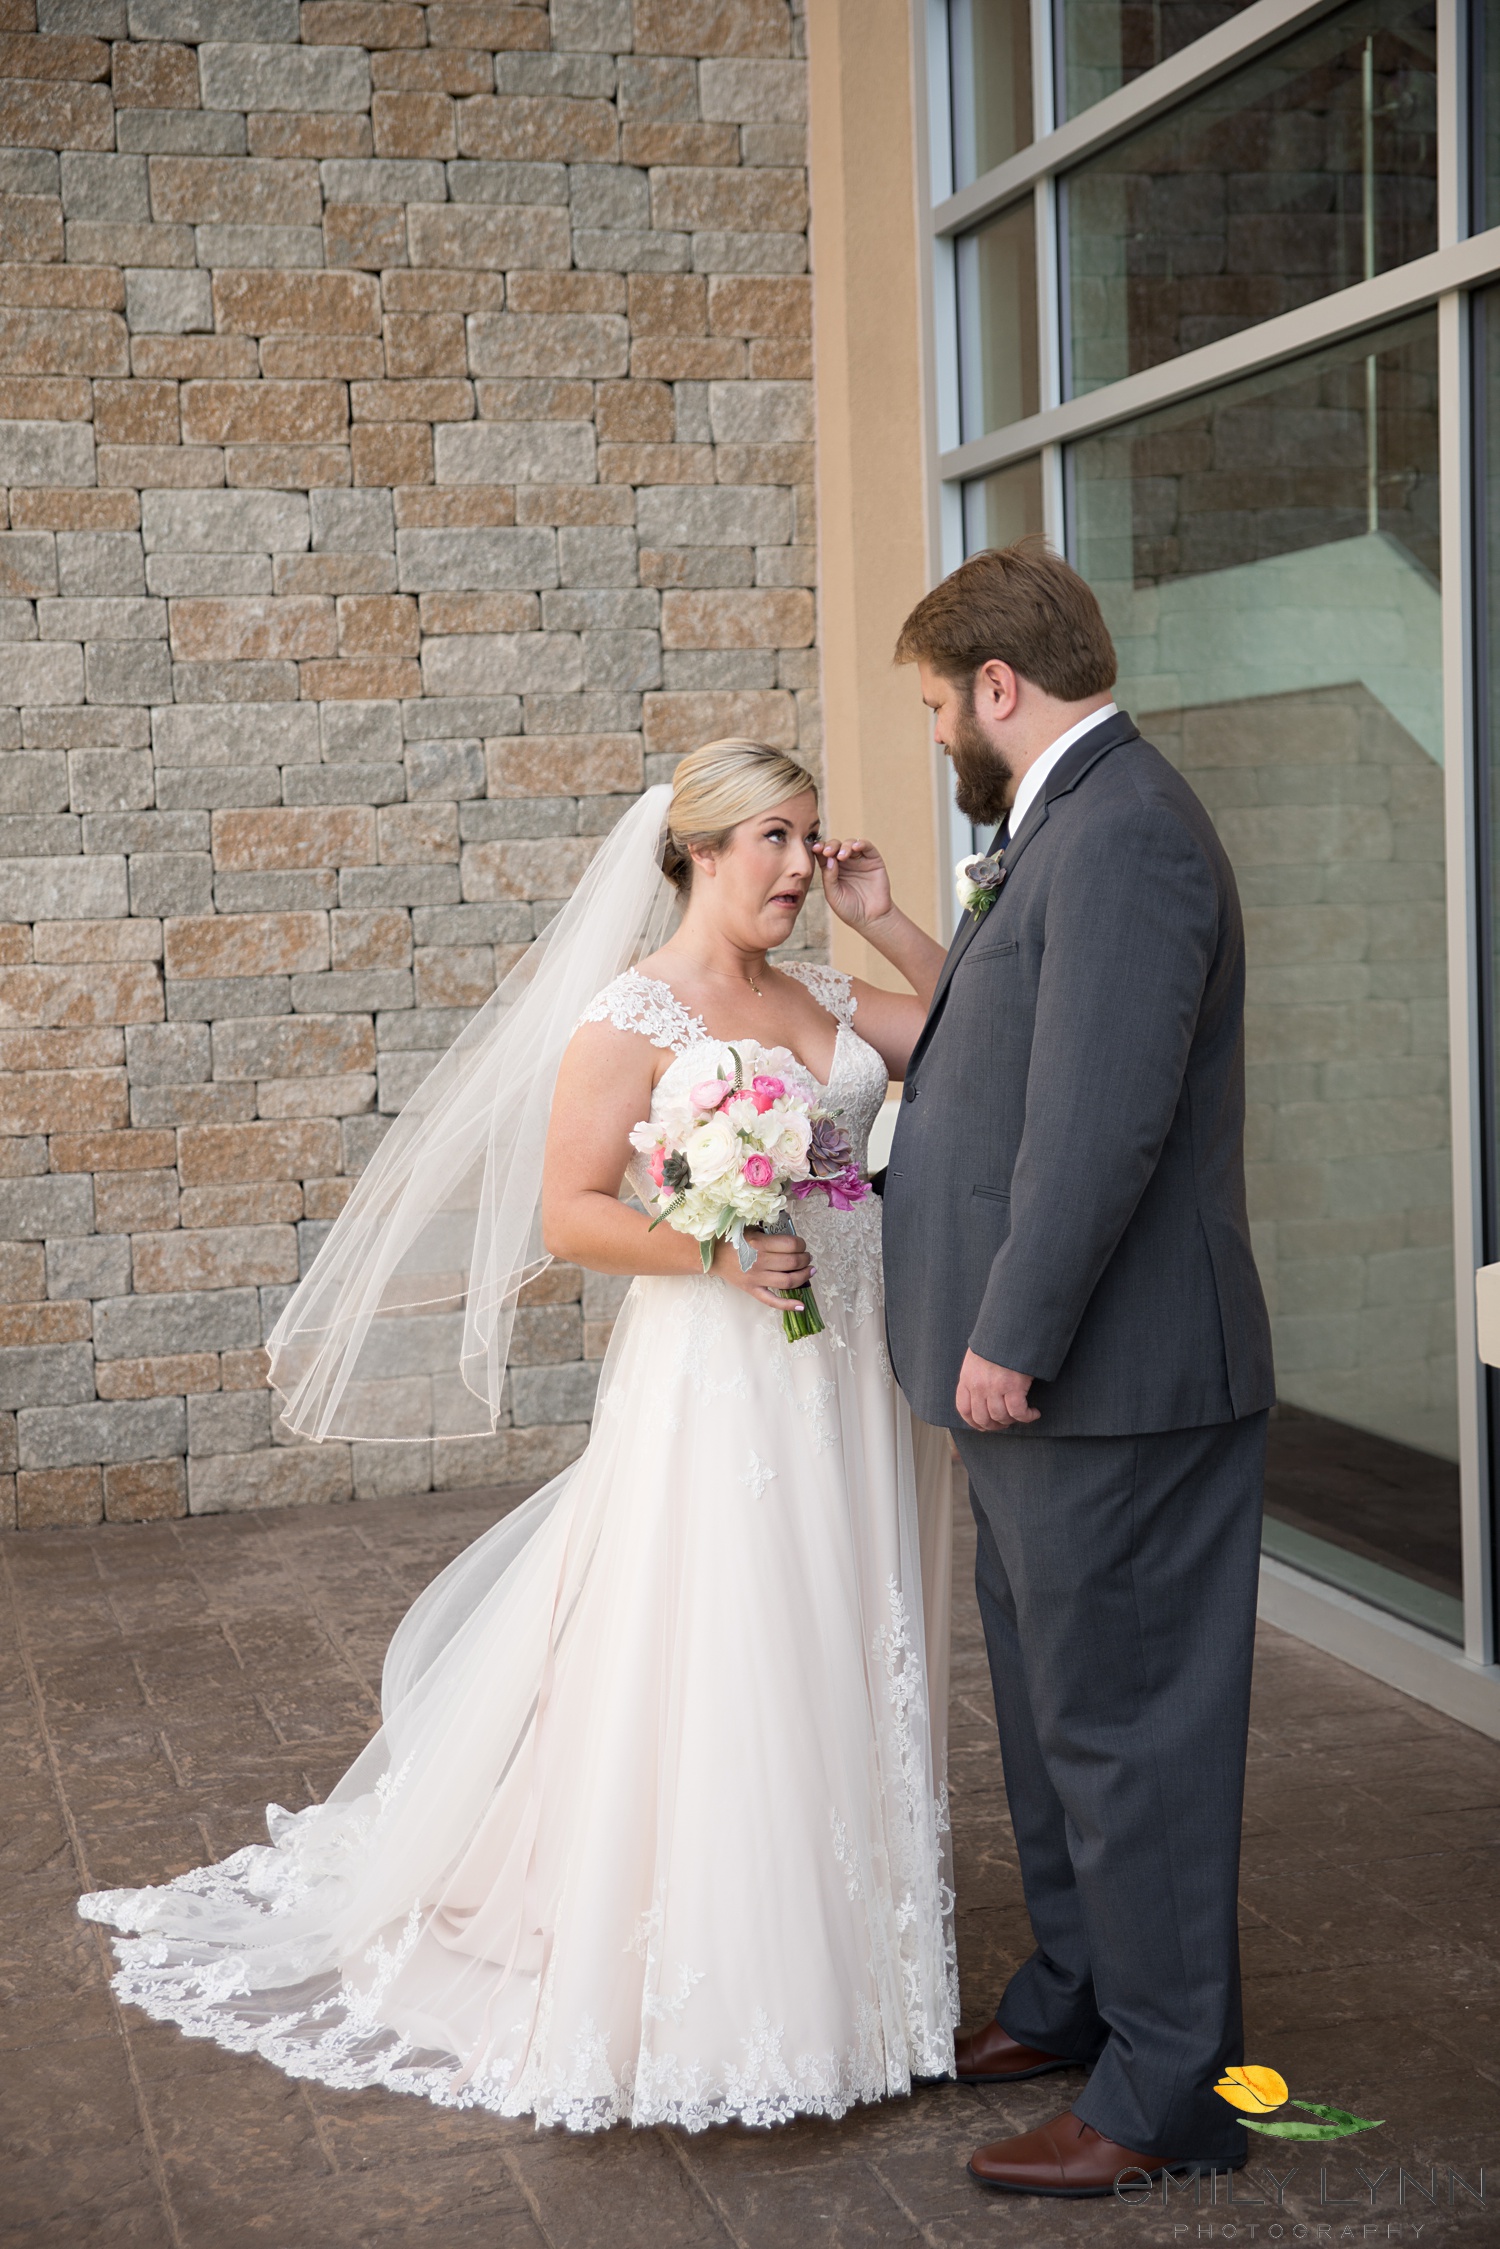 Courtyard by Marriott Kansas City at Briarcliff wedding photo